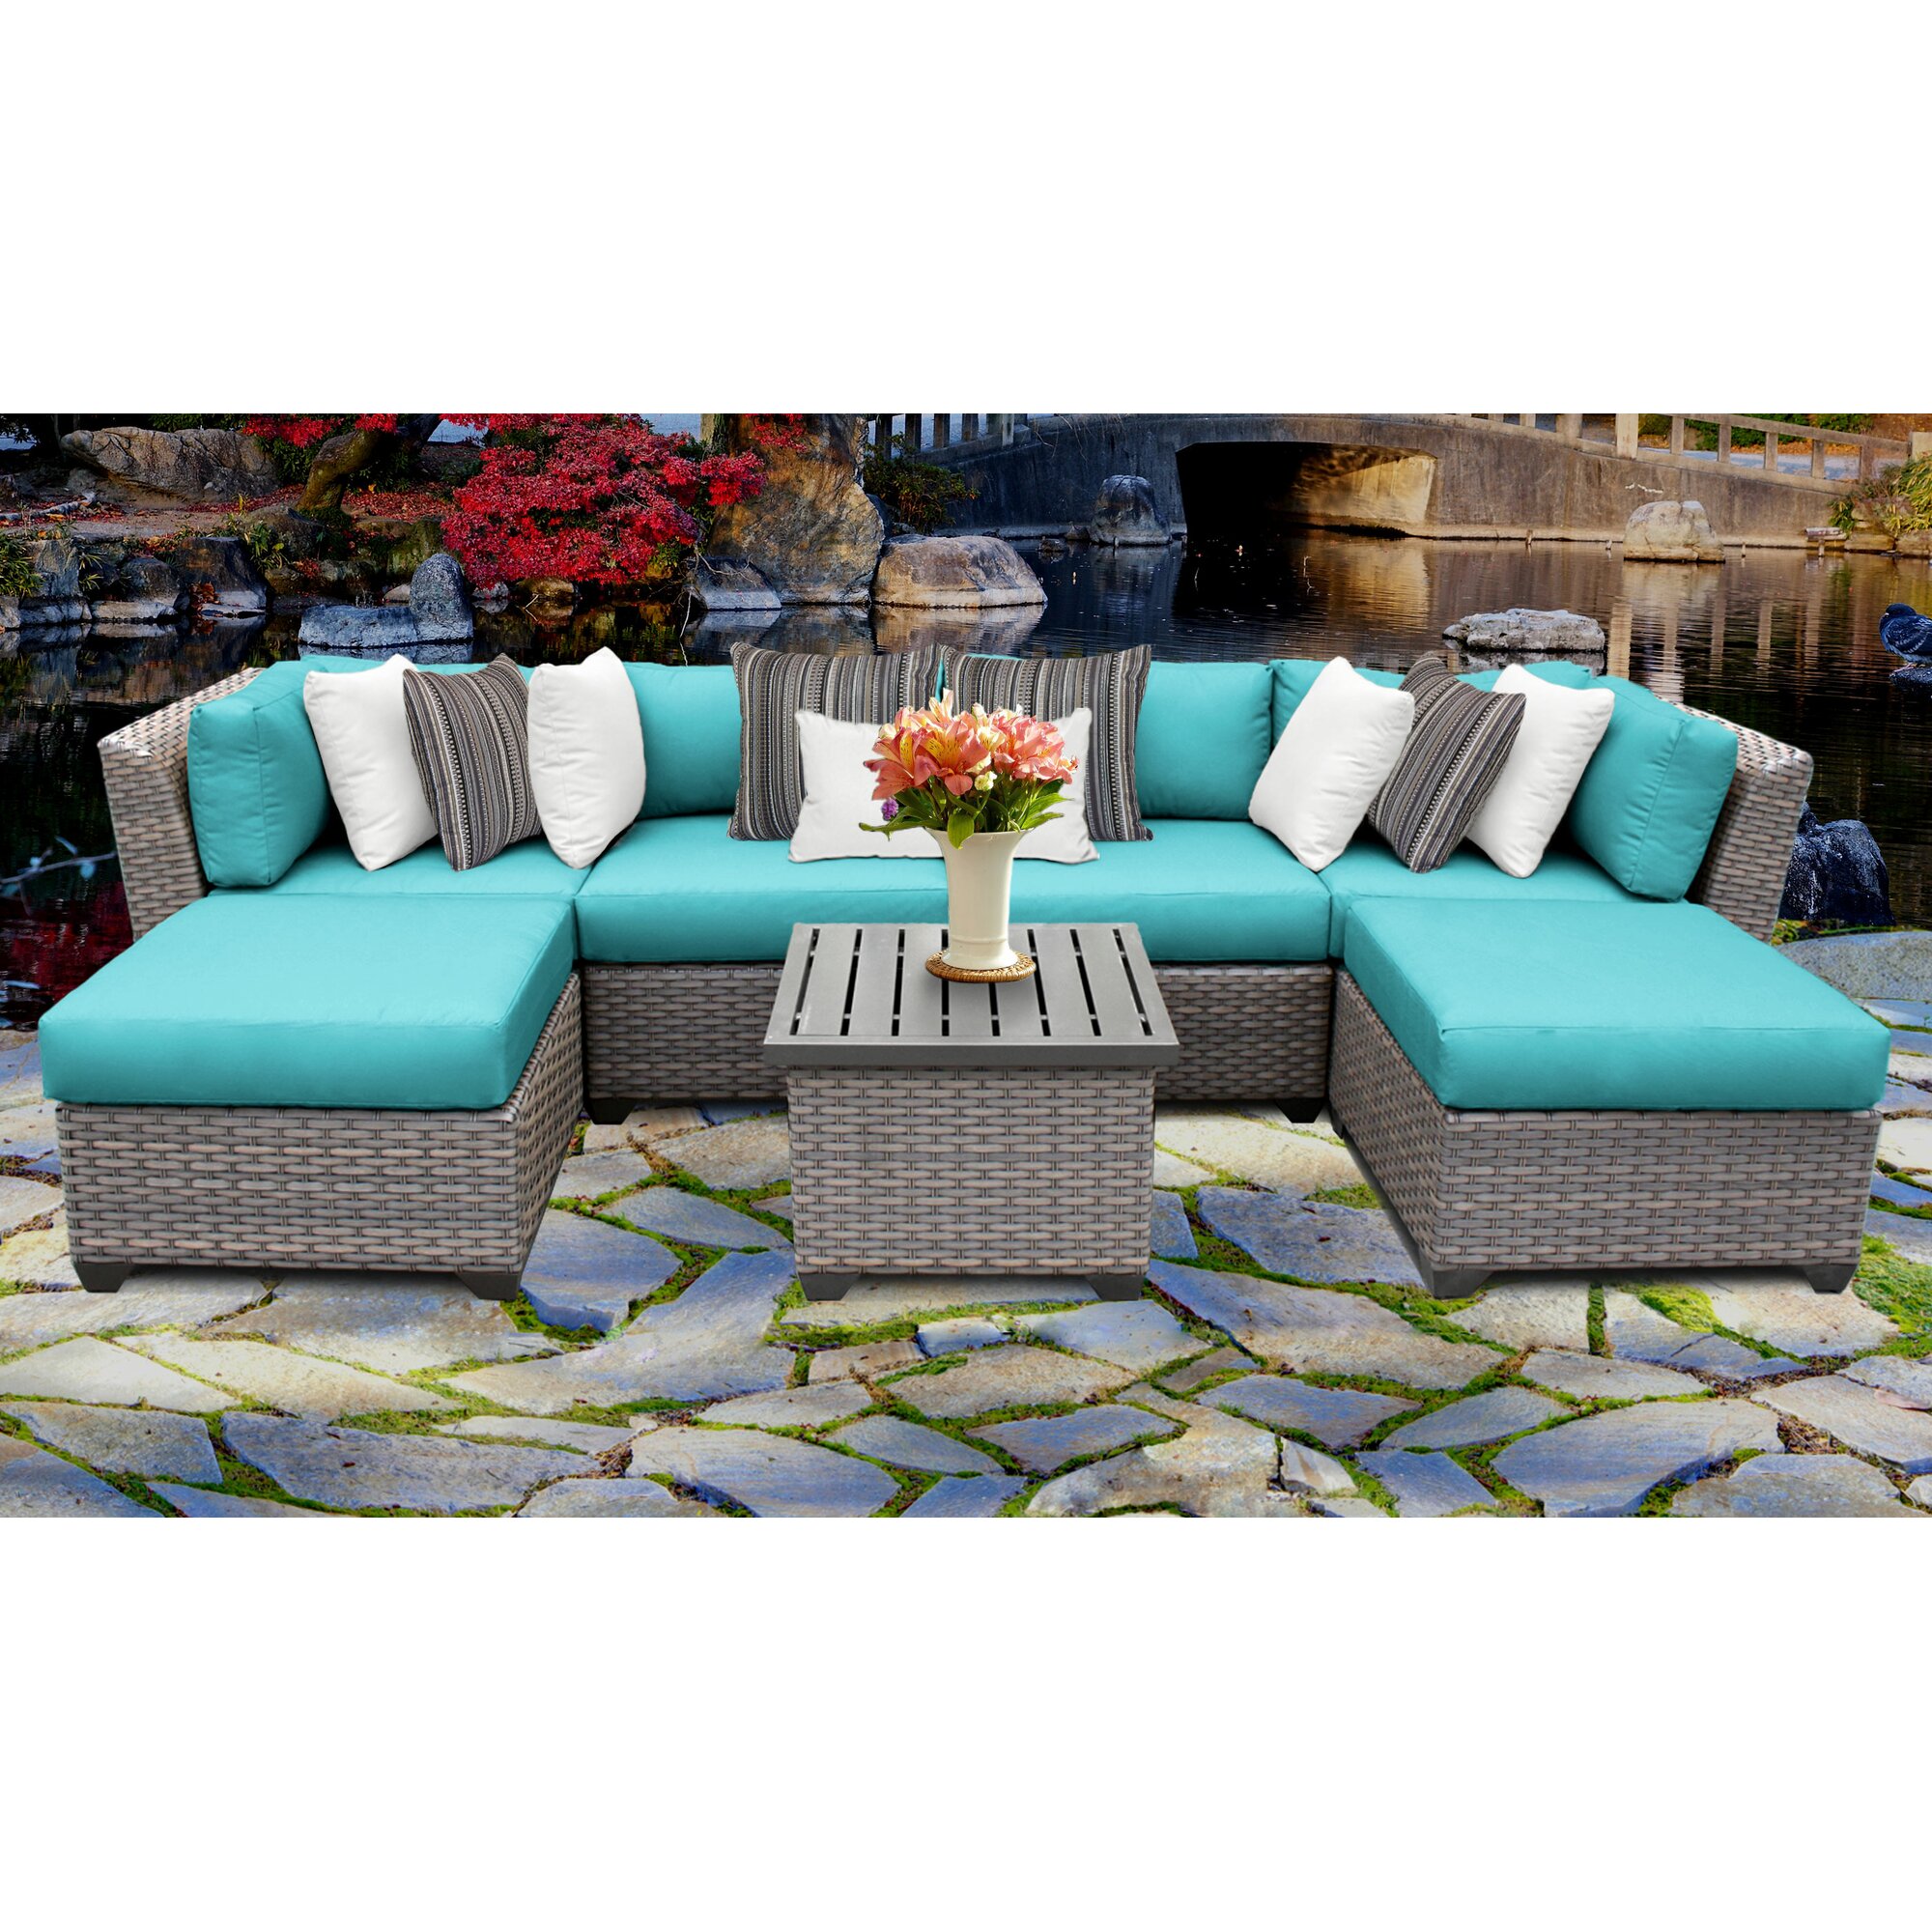 Caden 7 Piece Sectional Seating Group with Cushions